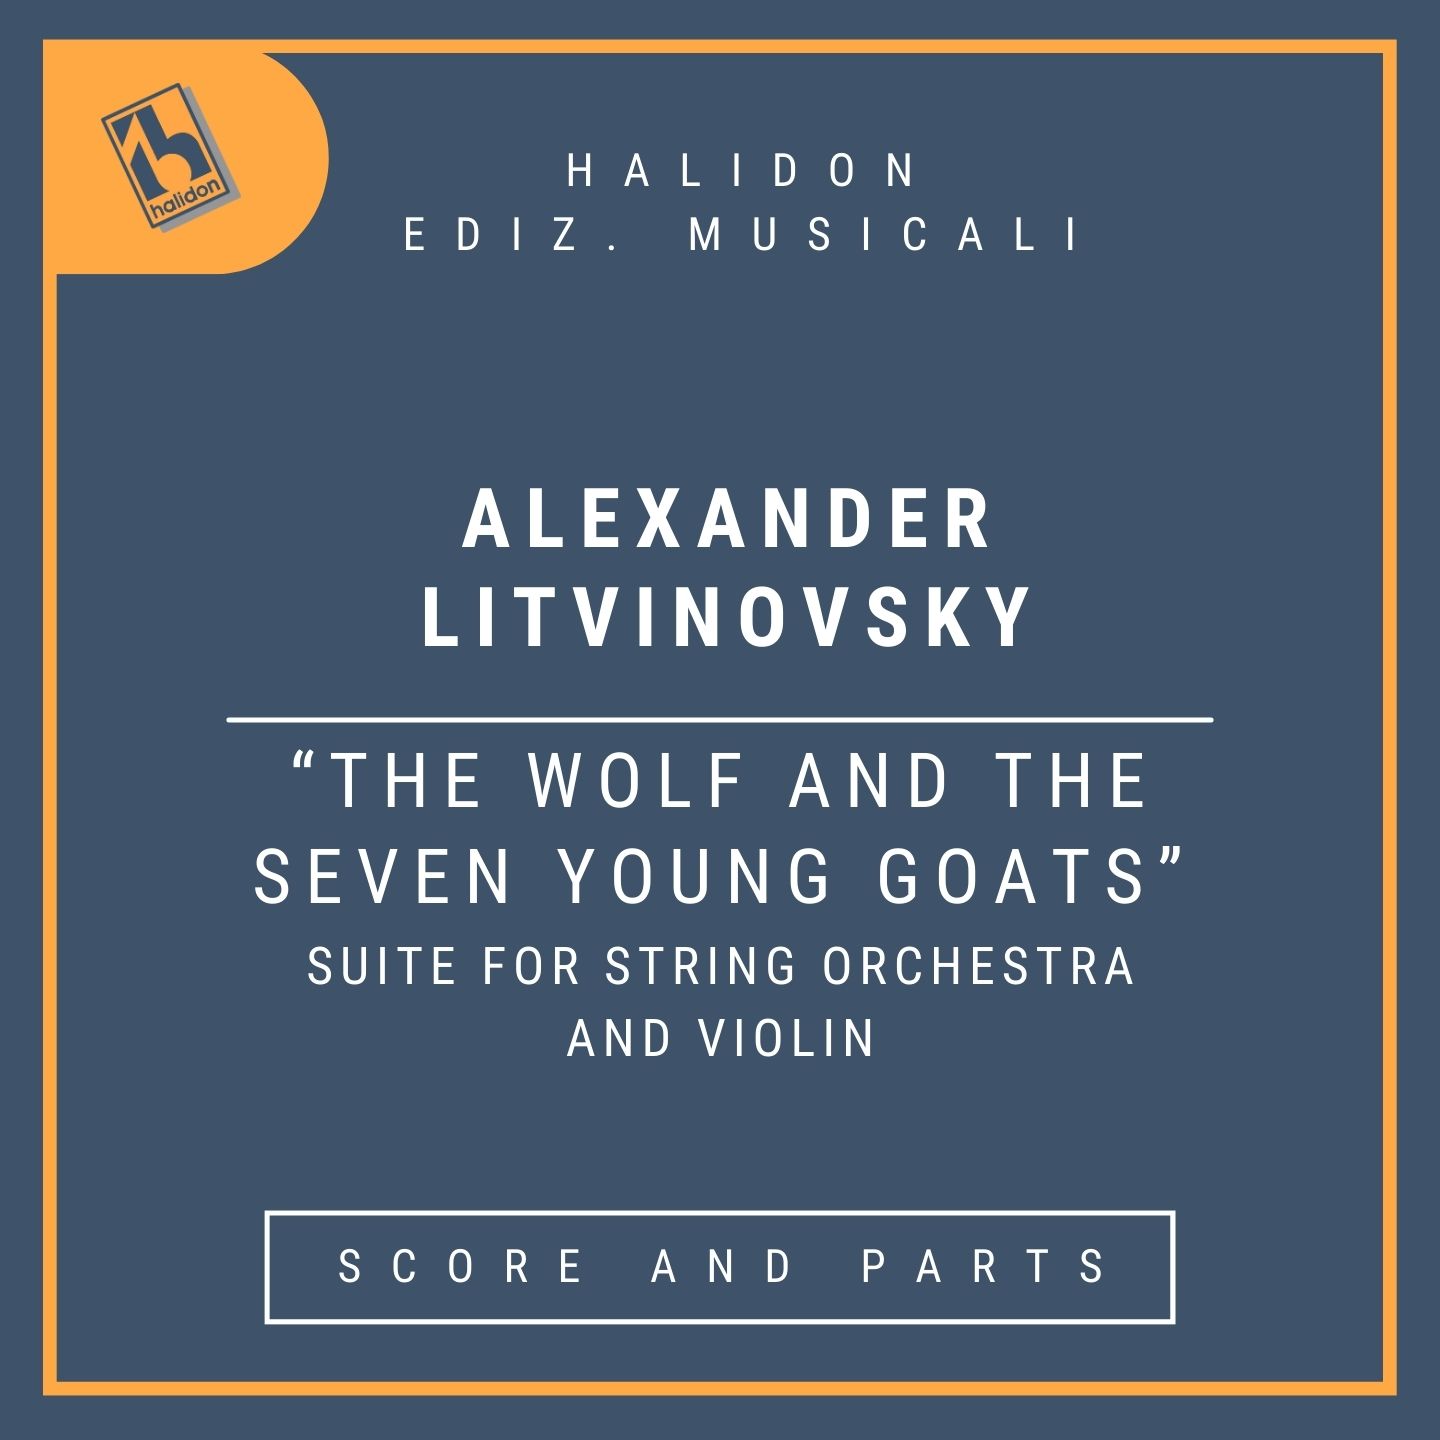 Litvinovsky: The Wolf and the Seven Young Goats (Suite for String Orchestra and Violin) - Score & Parts